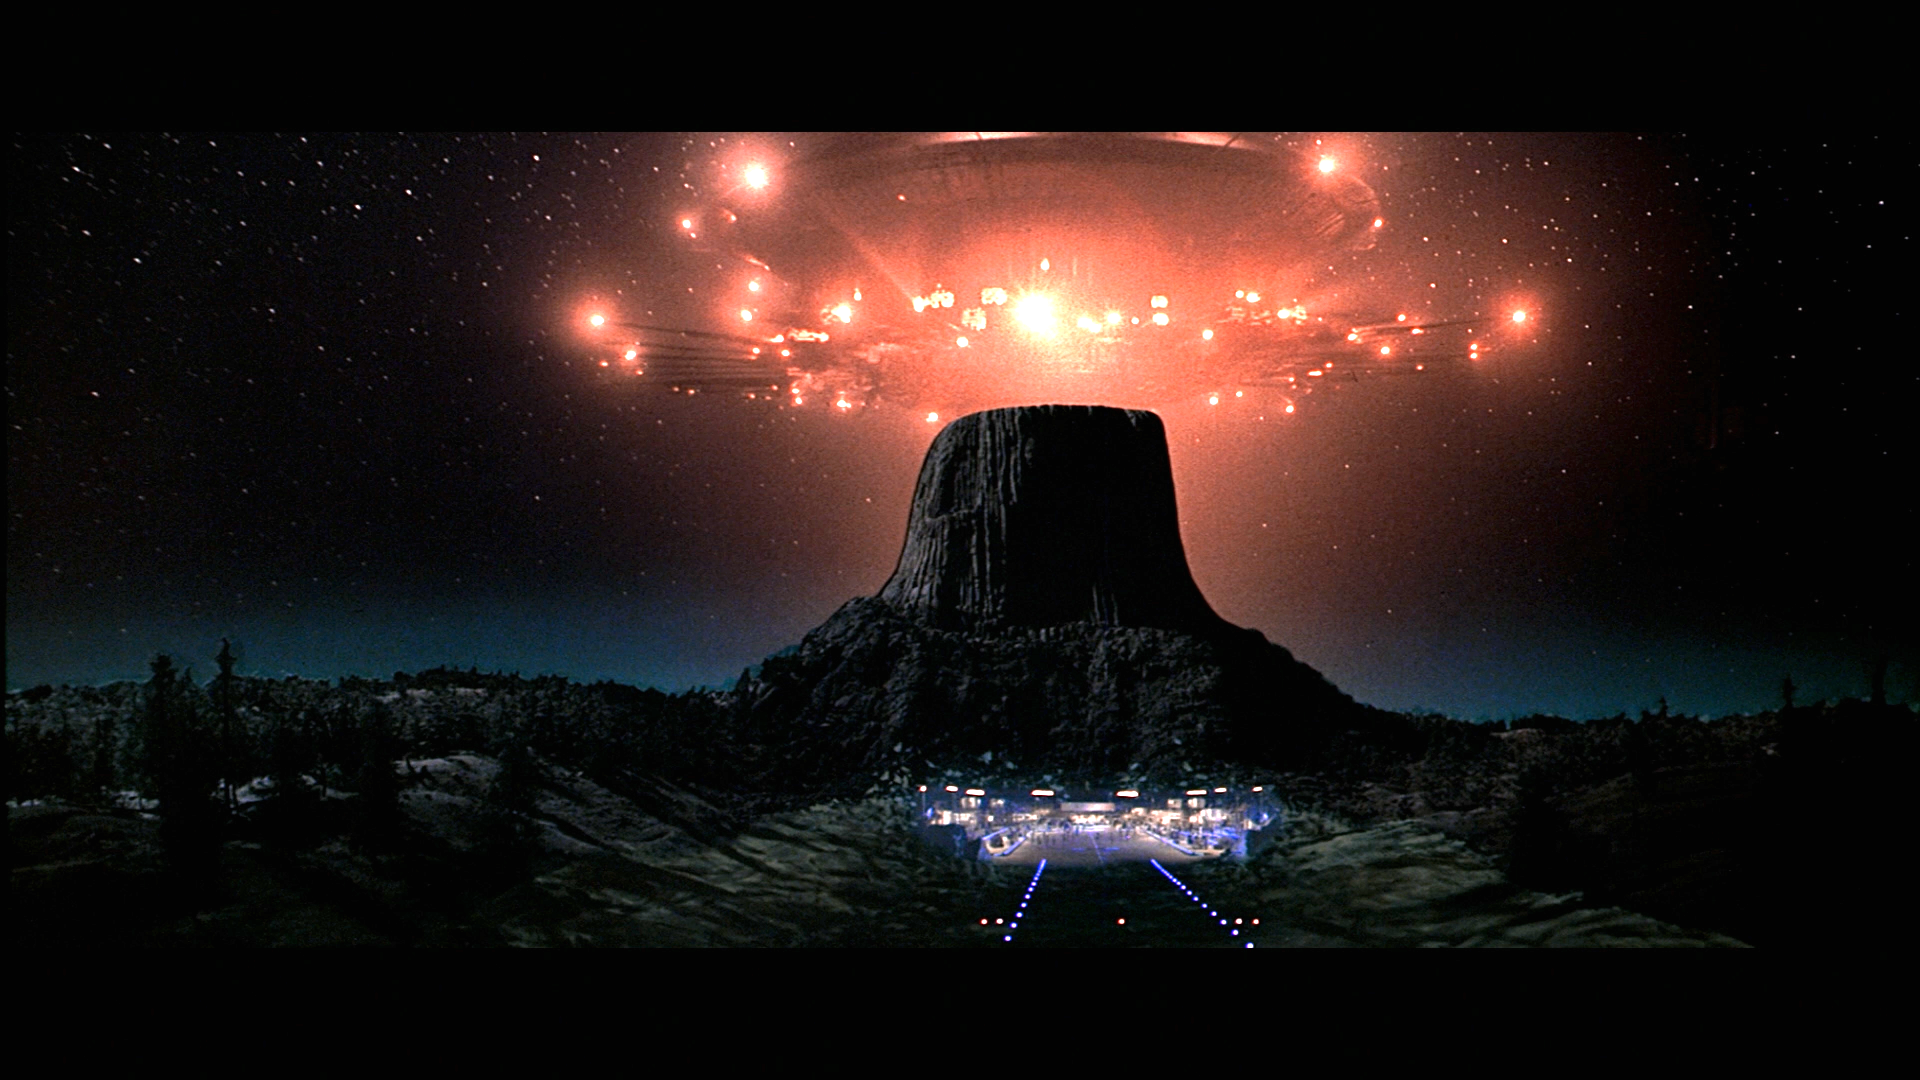 close, Encounters, Of, The, Third, Kind, Sci fi, Drama, Thriller, Spaceship, Fs Wallpaper